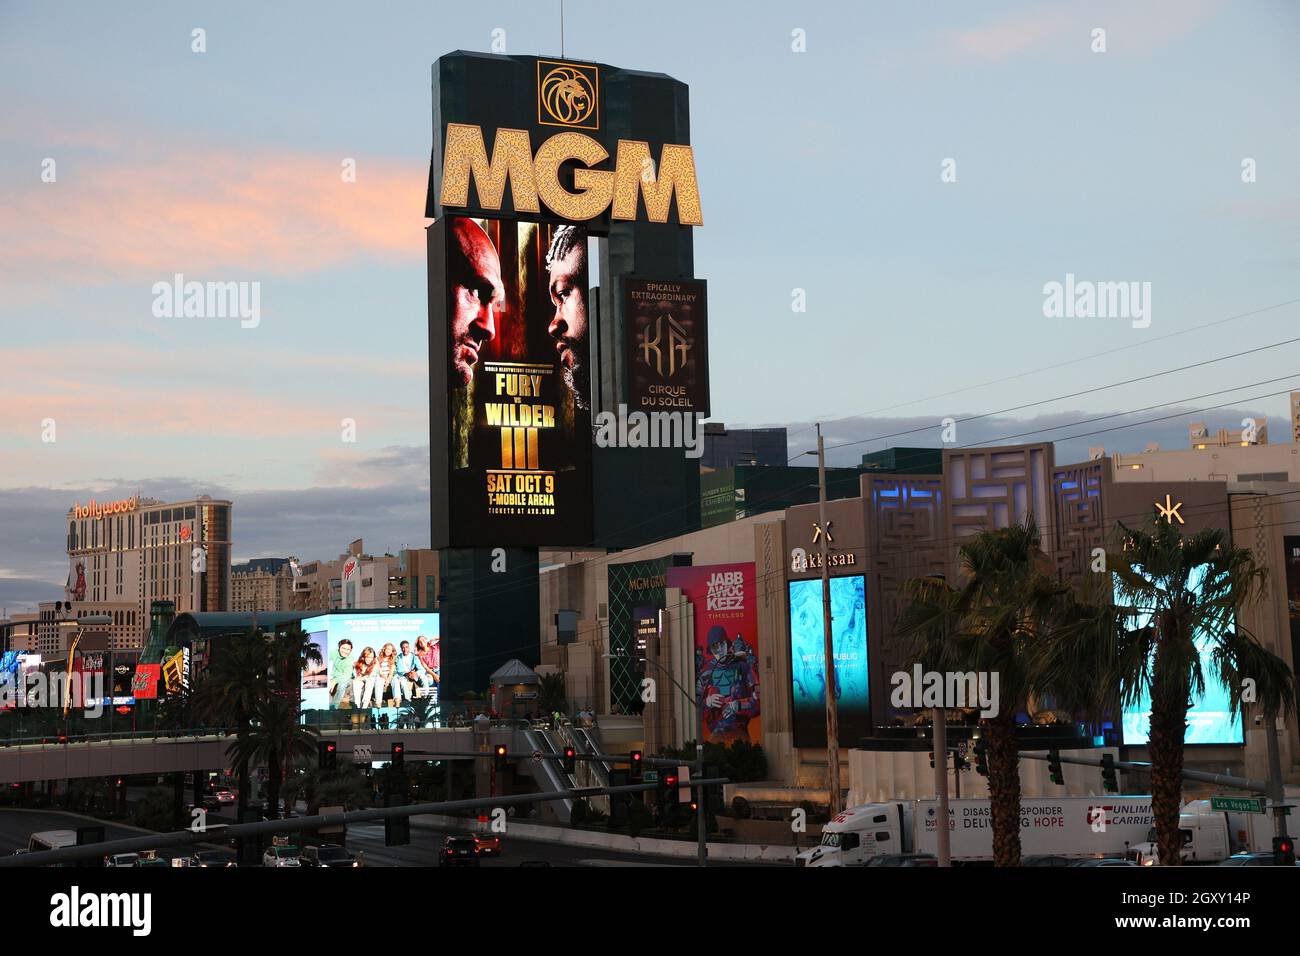 MGM Bets on Live Events With T-Mobile Arena, New Theater – Billboard